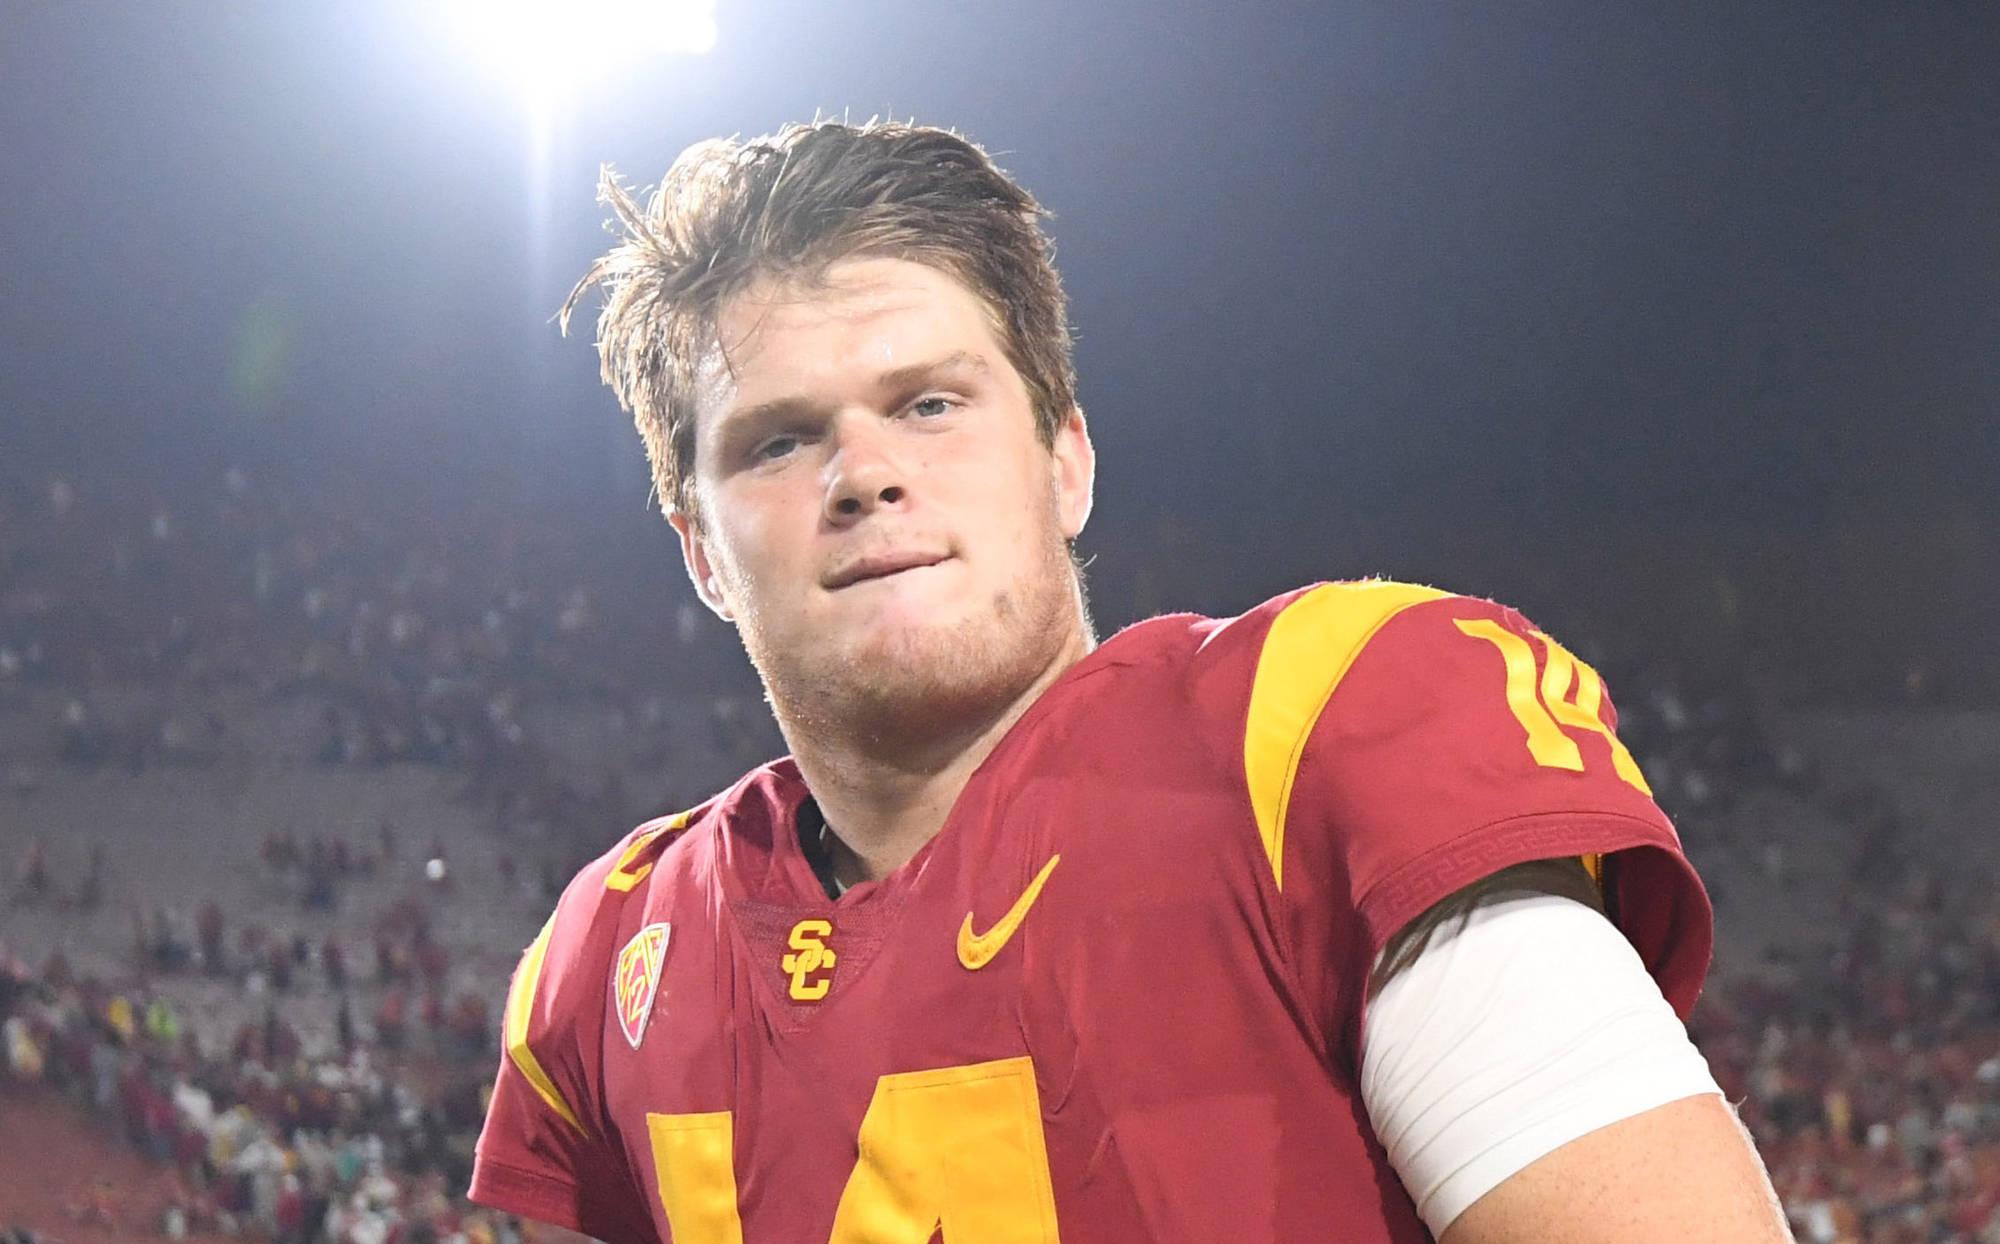 Fan shows off Sam Darnold Jets jersey at USC game